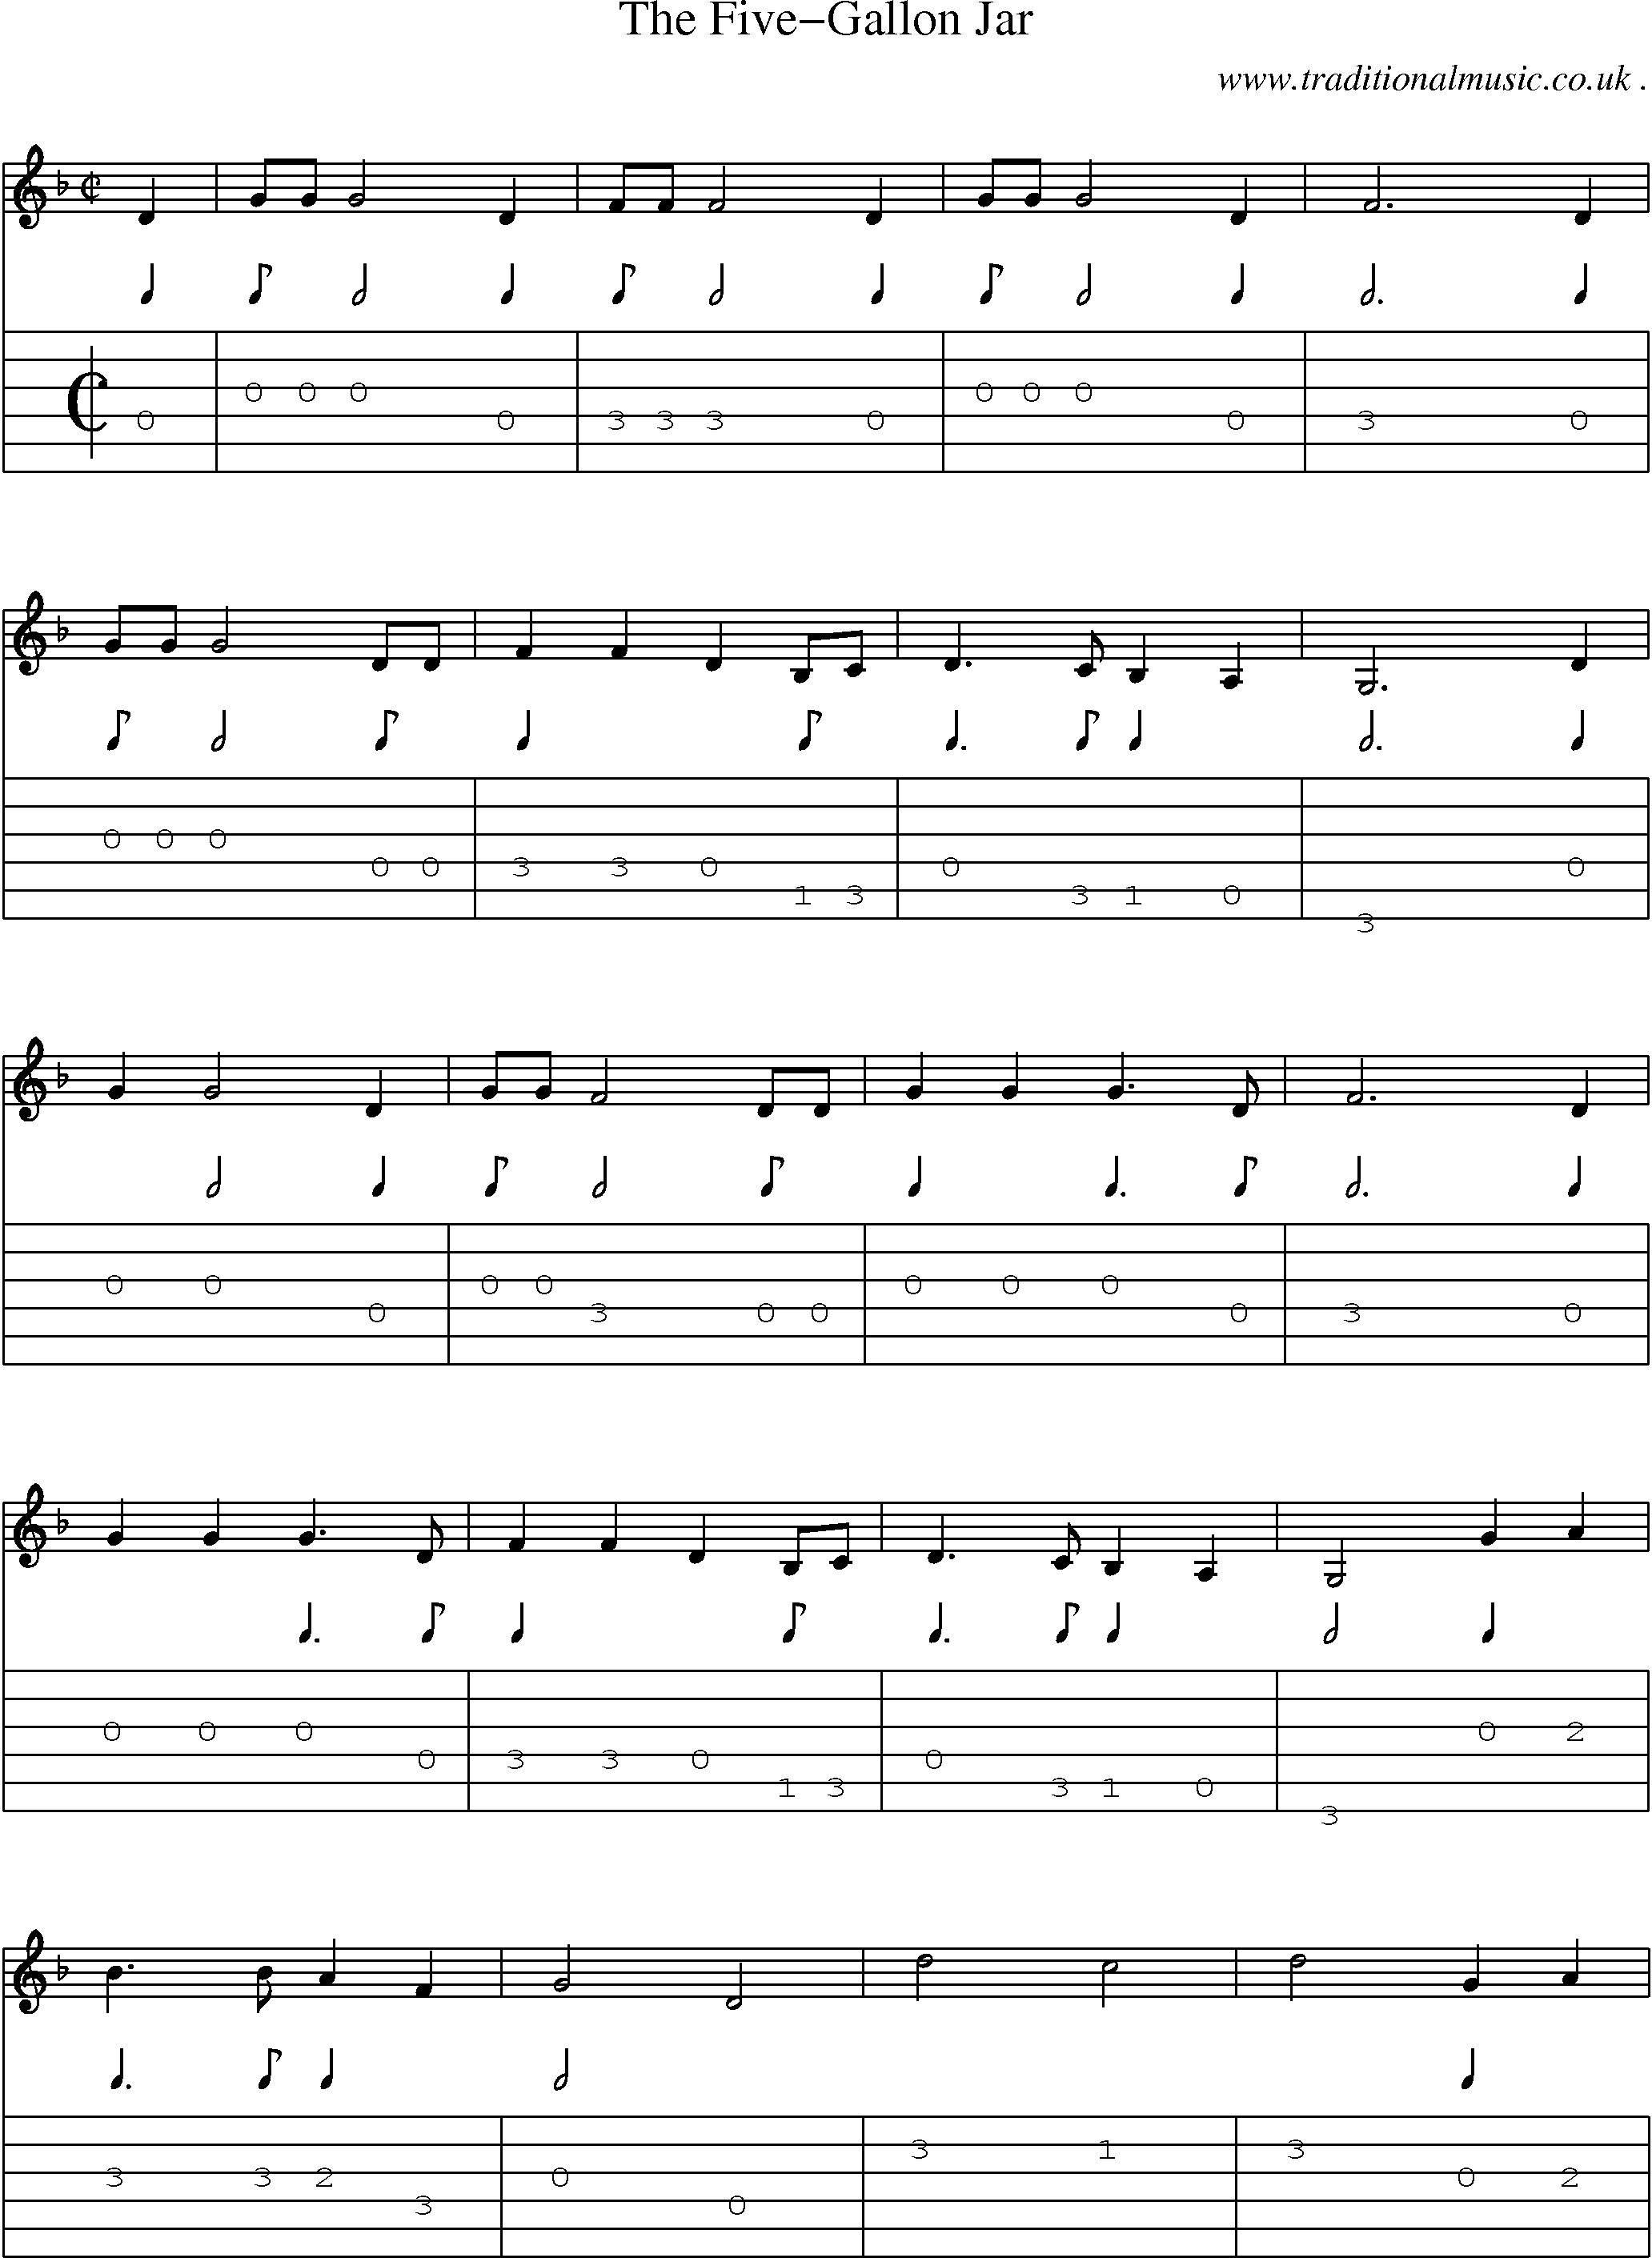 Sheet-Music and Guitar Tabs for The Five-gallon Jar